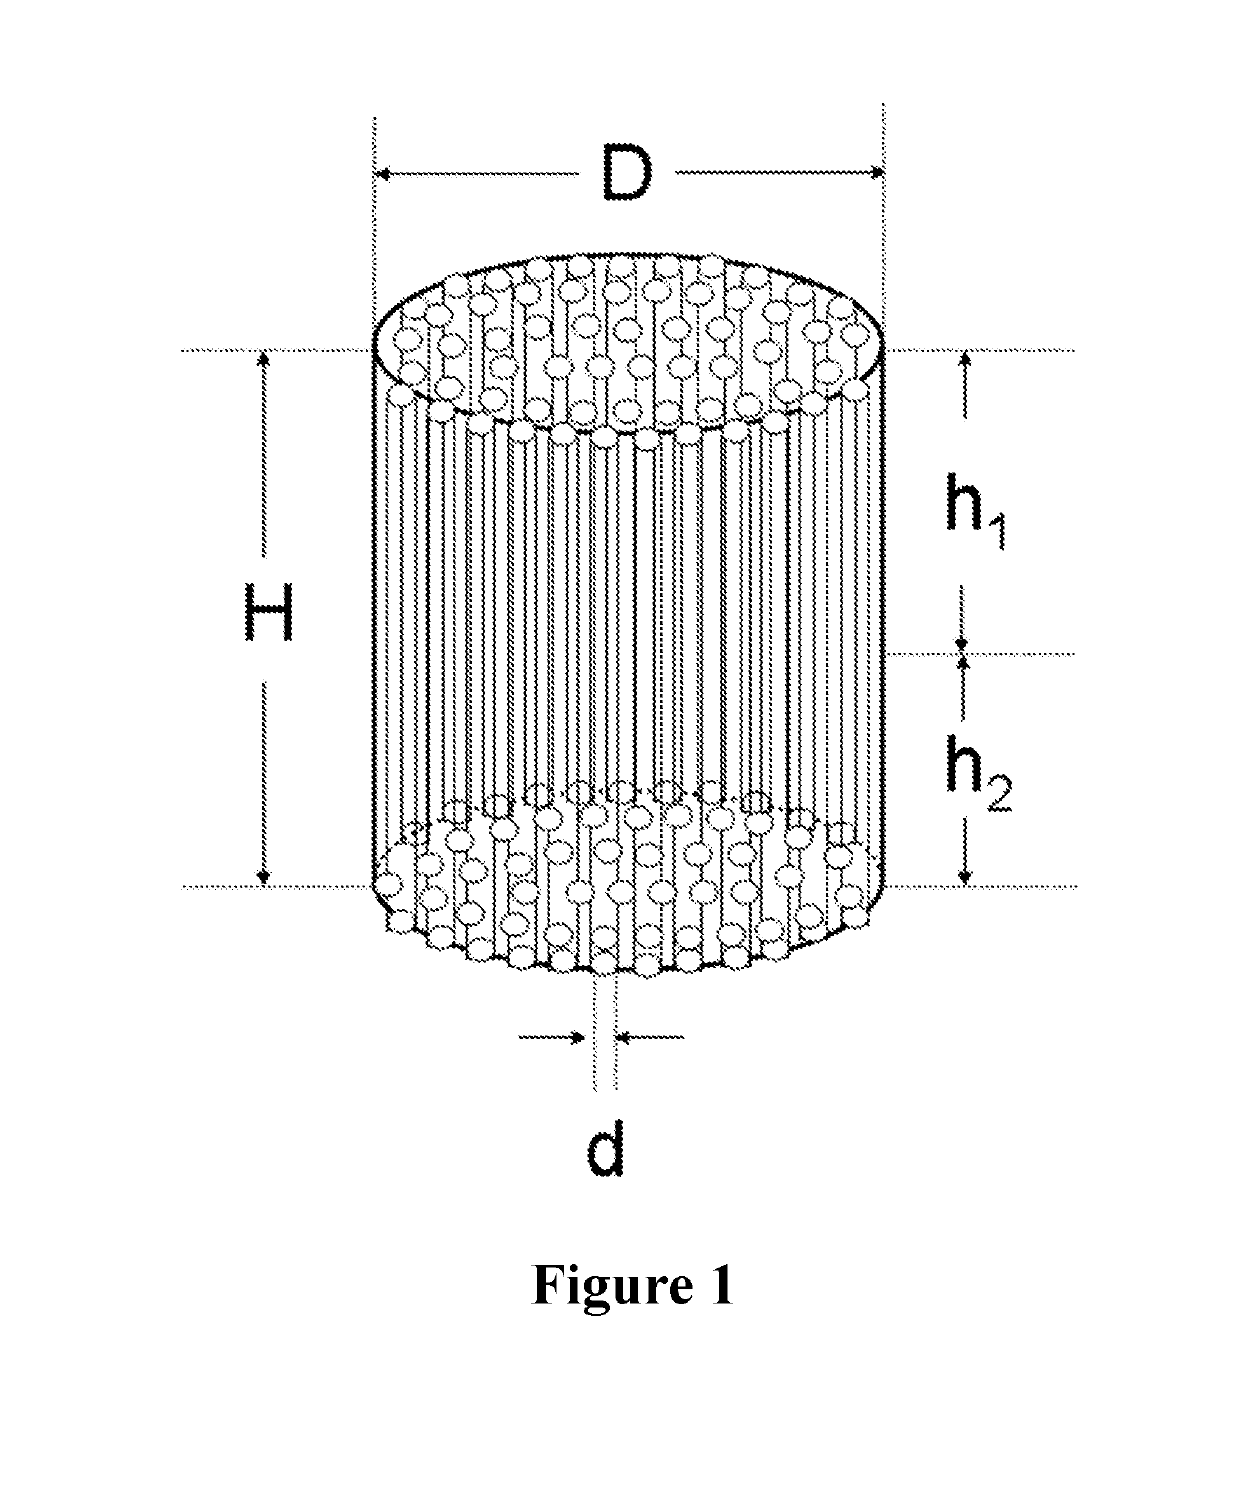 Monolithic catalyst used for carbon dioxide hydrogenation reaction and method for preparing same